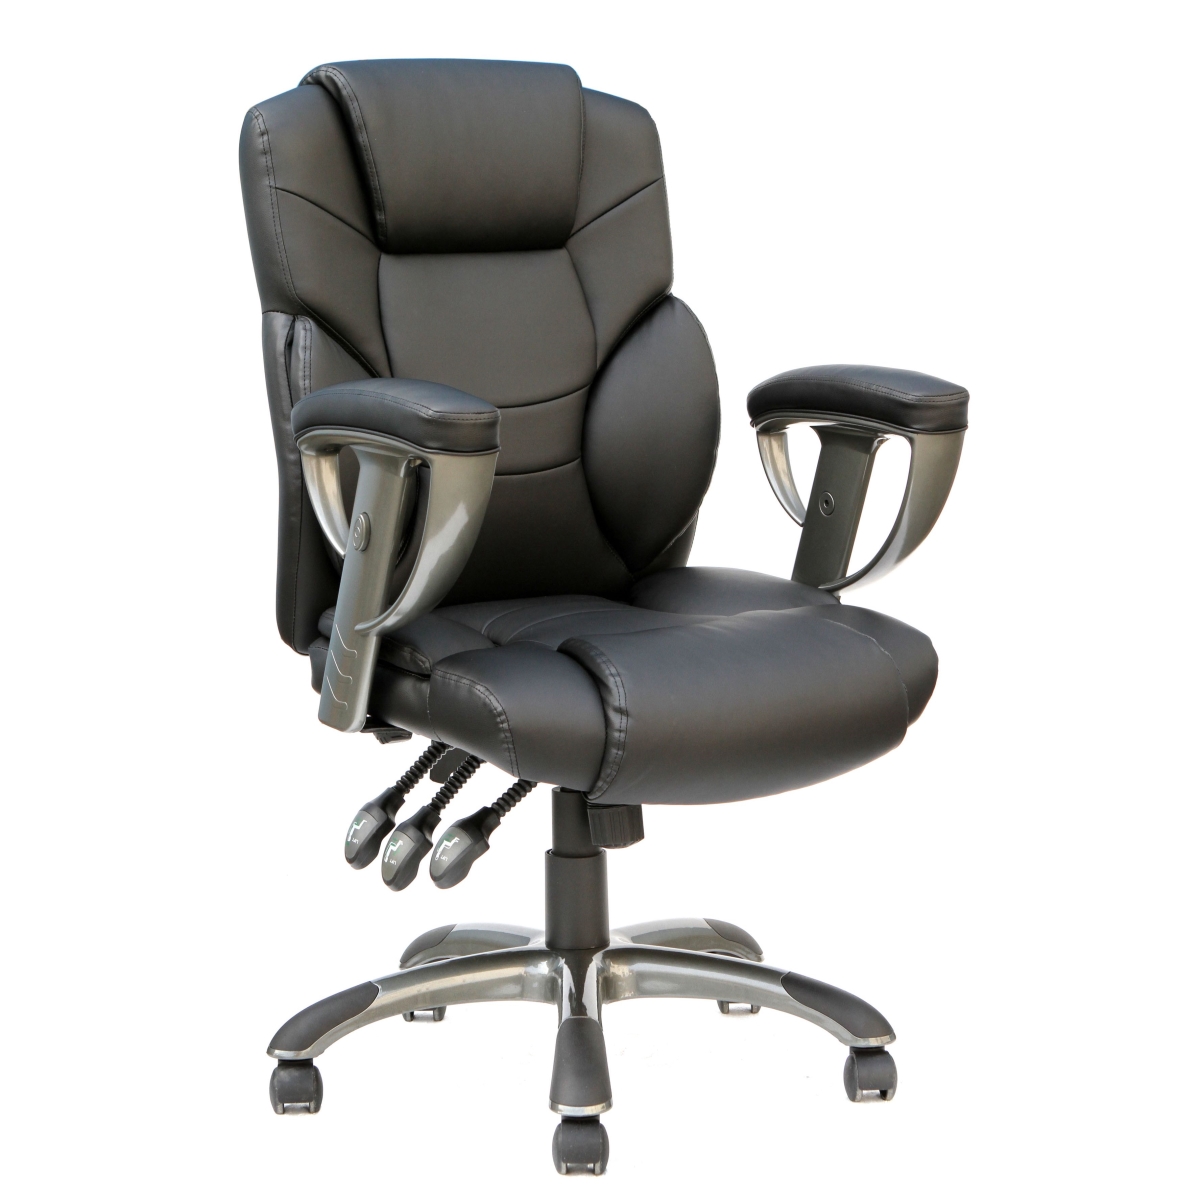 Tyfc2314 Executive High Back Bonded Leather Office Chair